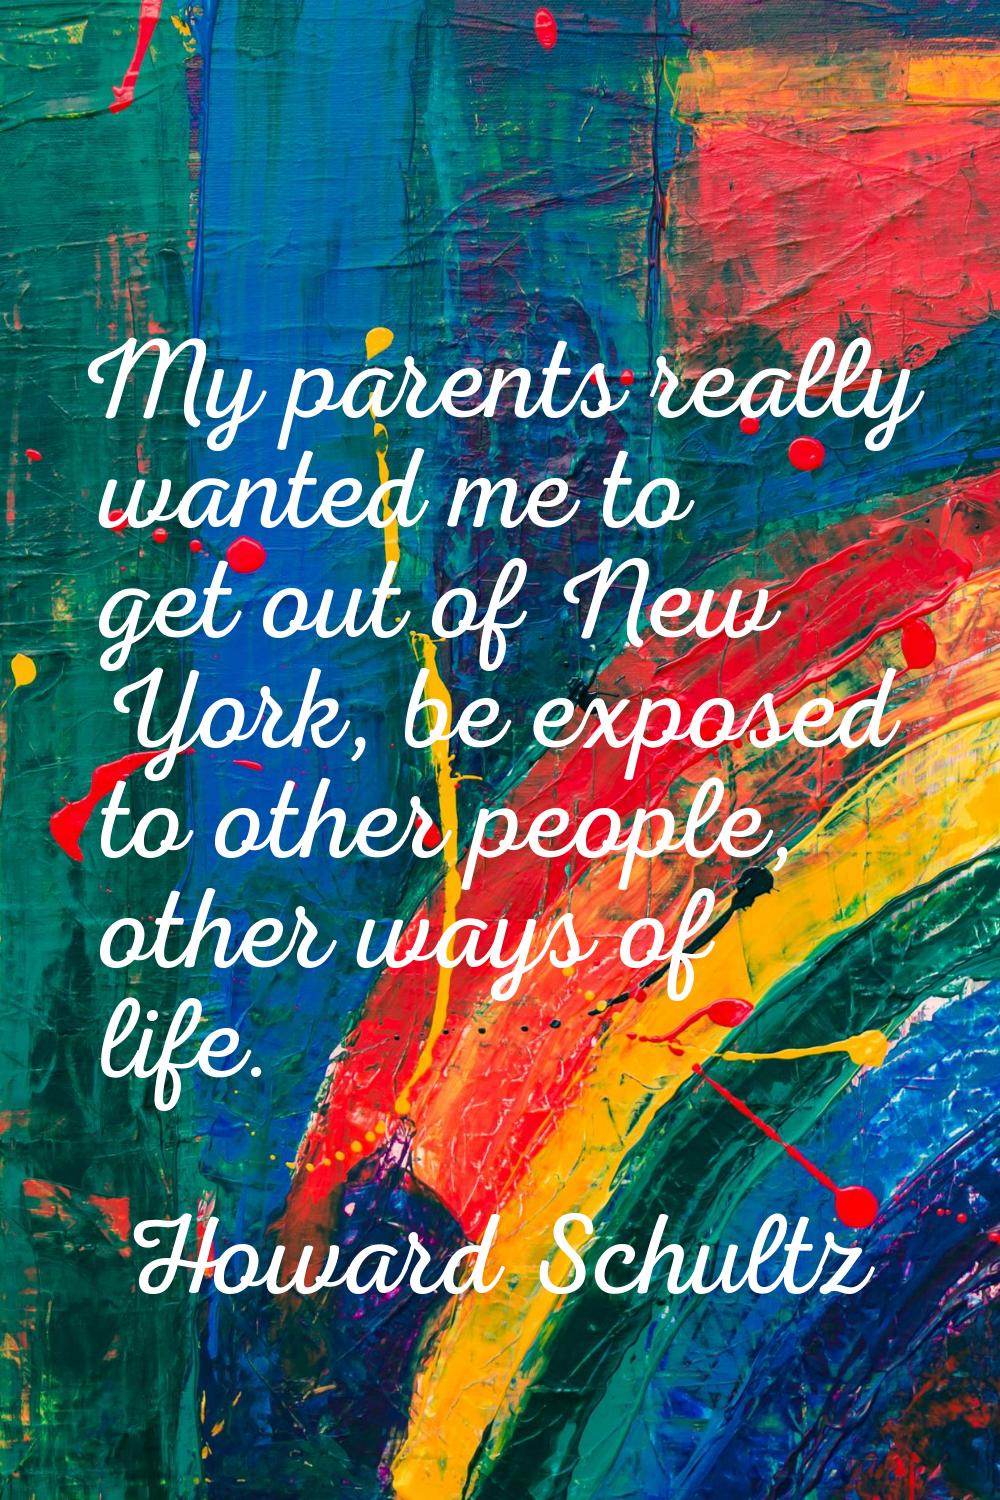 My parents really wanted me to get out of New York, be exposed to other people, other ways of life.